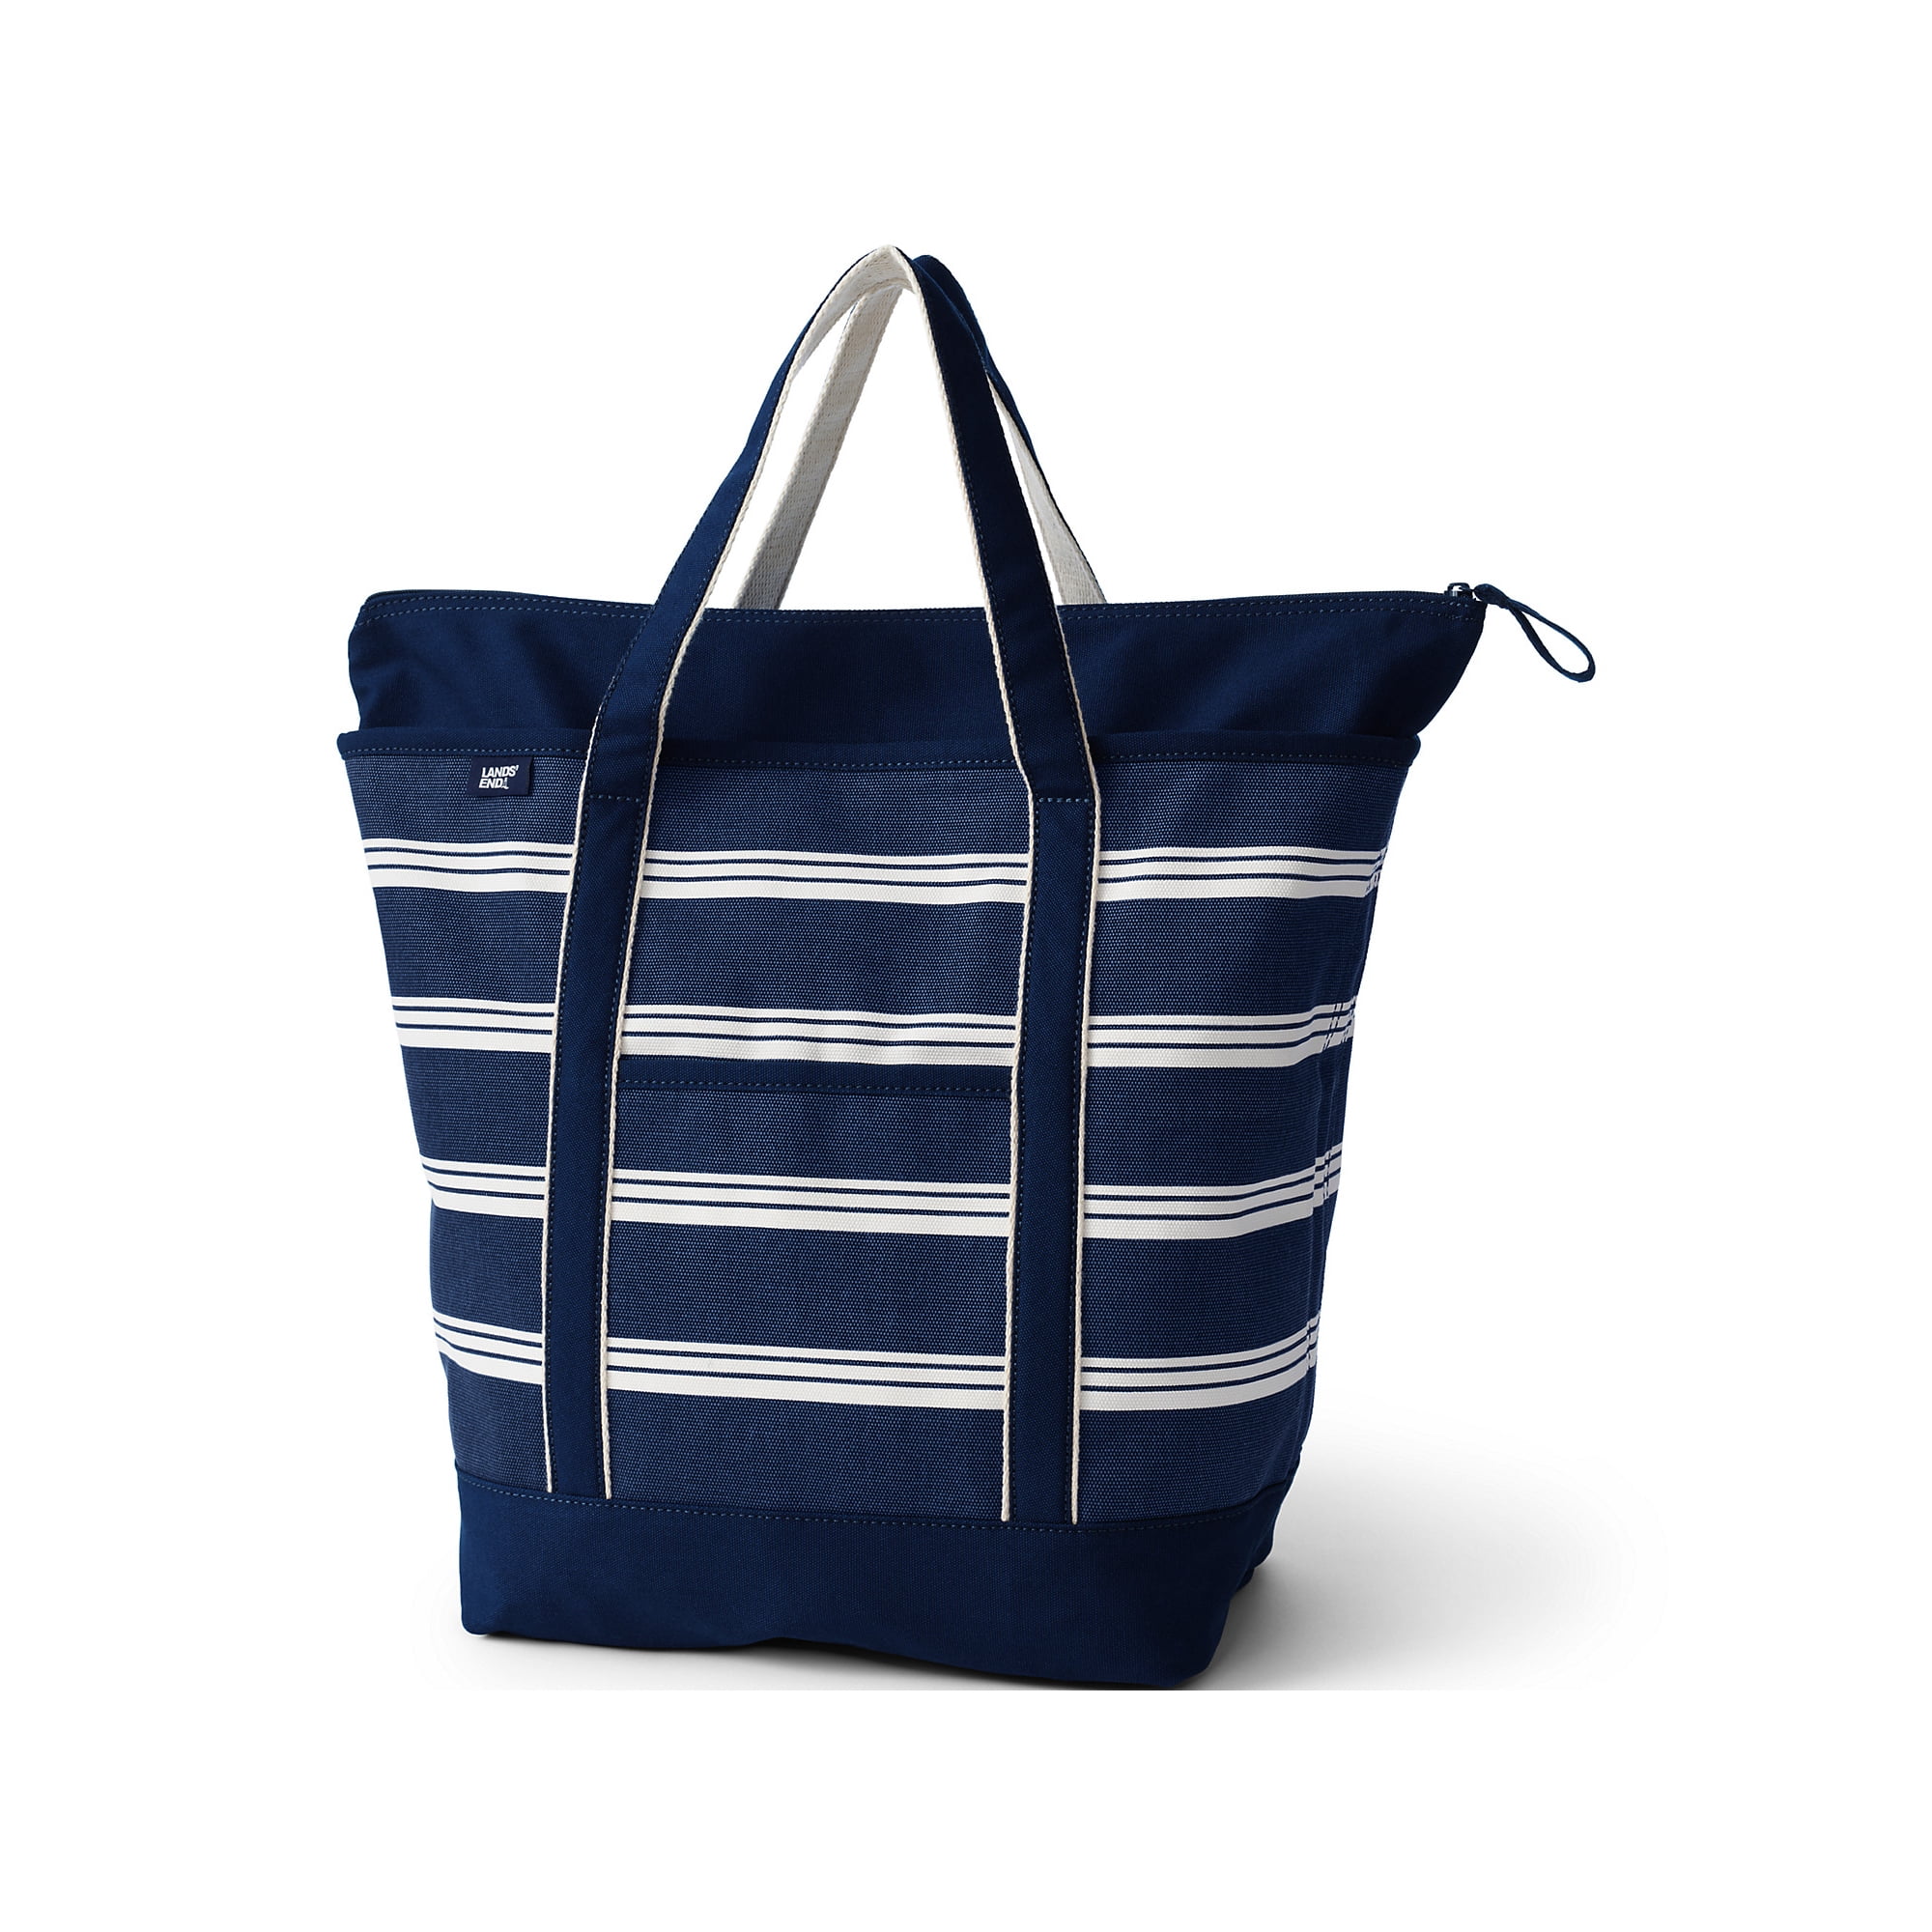 Lands' End Extra Large Print 5 Pocket Open Top Long Handle Canvas Tote Bag - Deep Sea Navy Founders Stripe